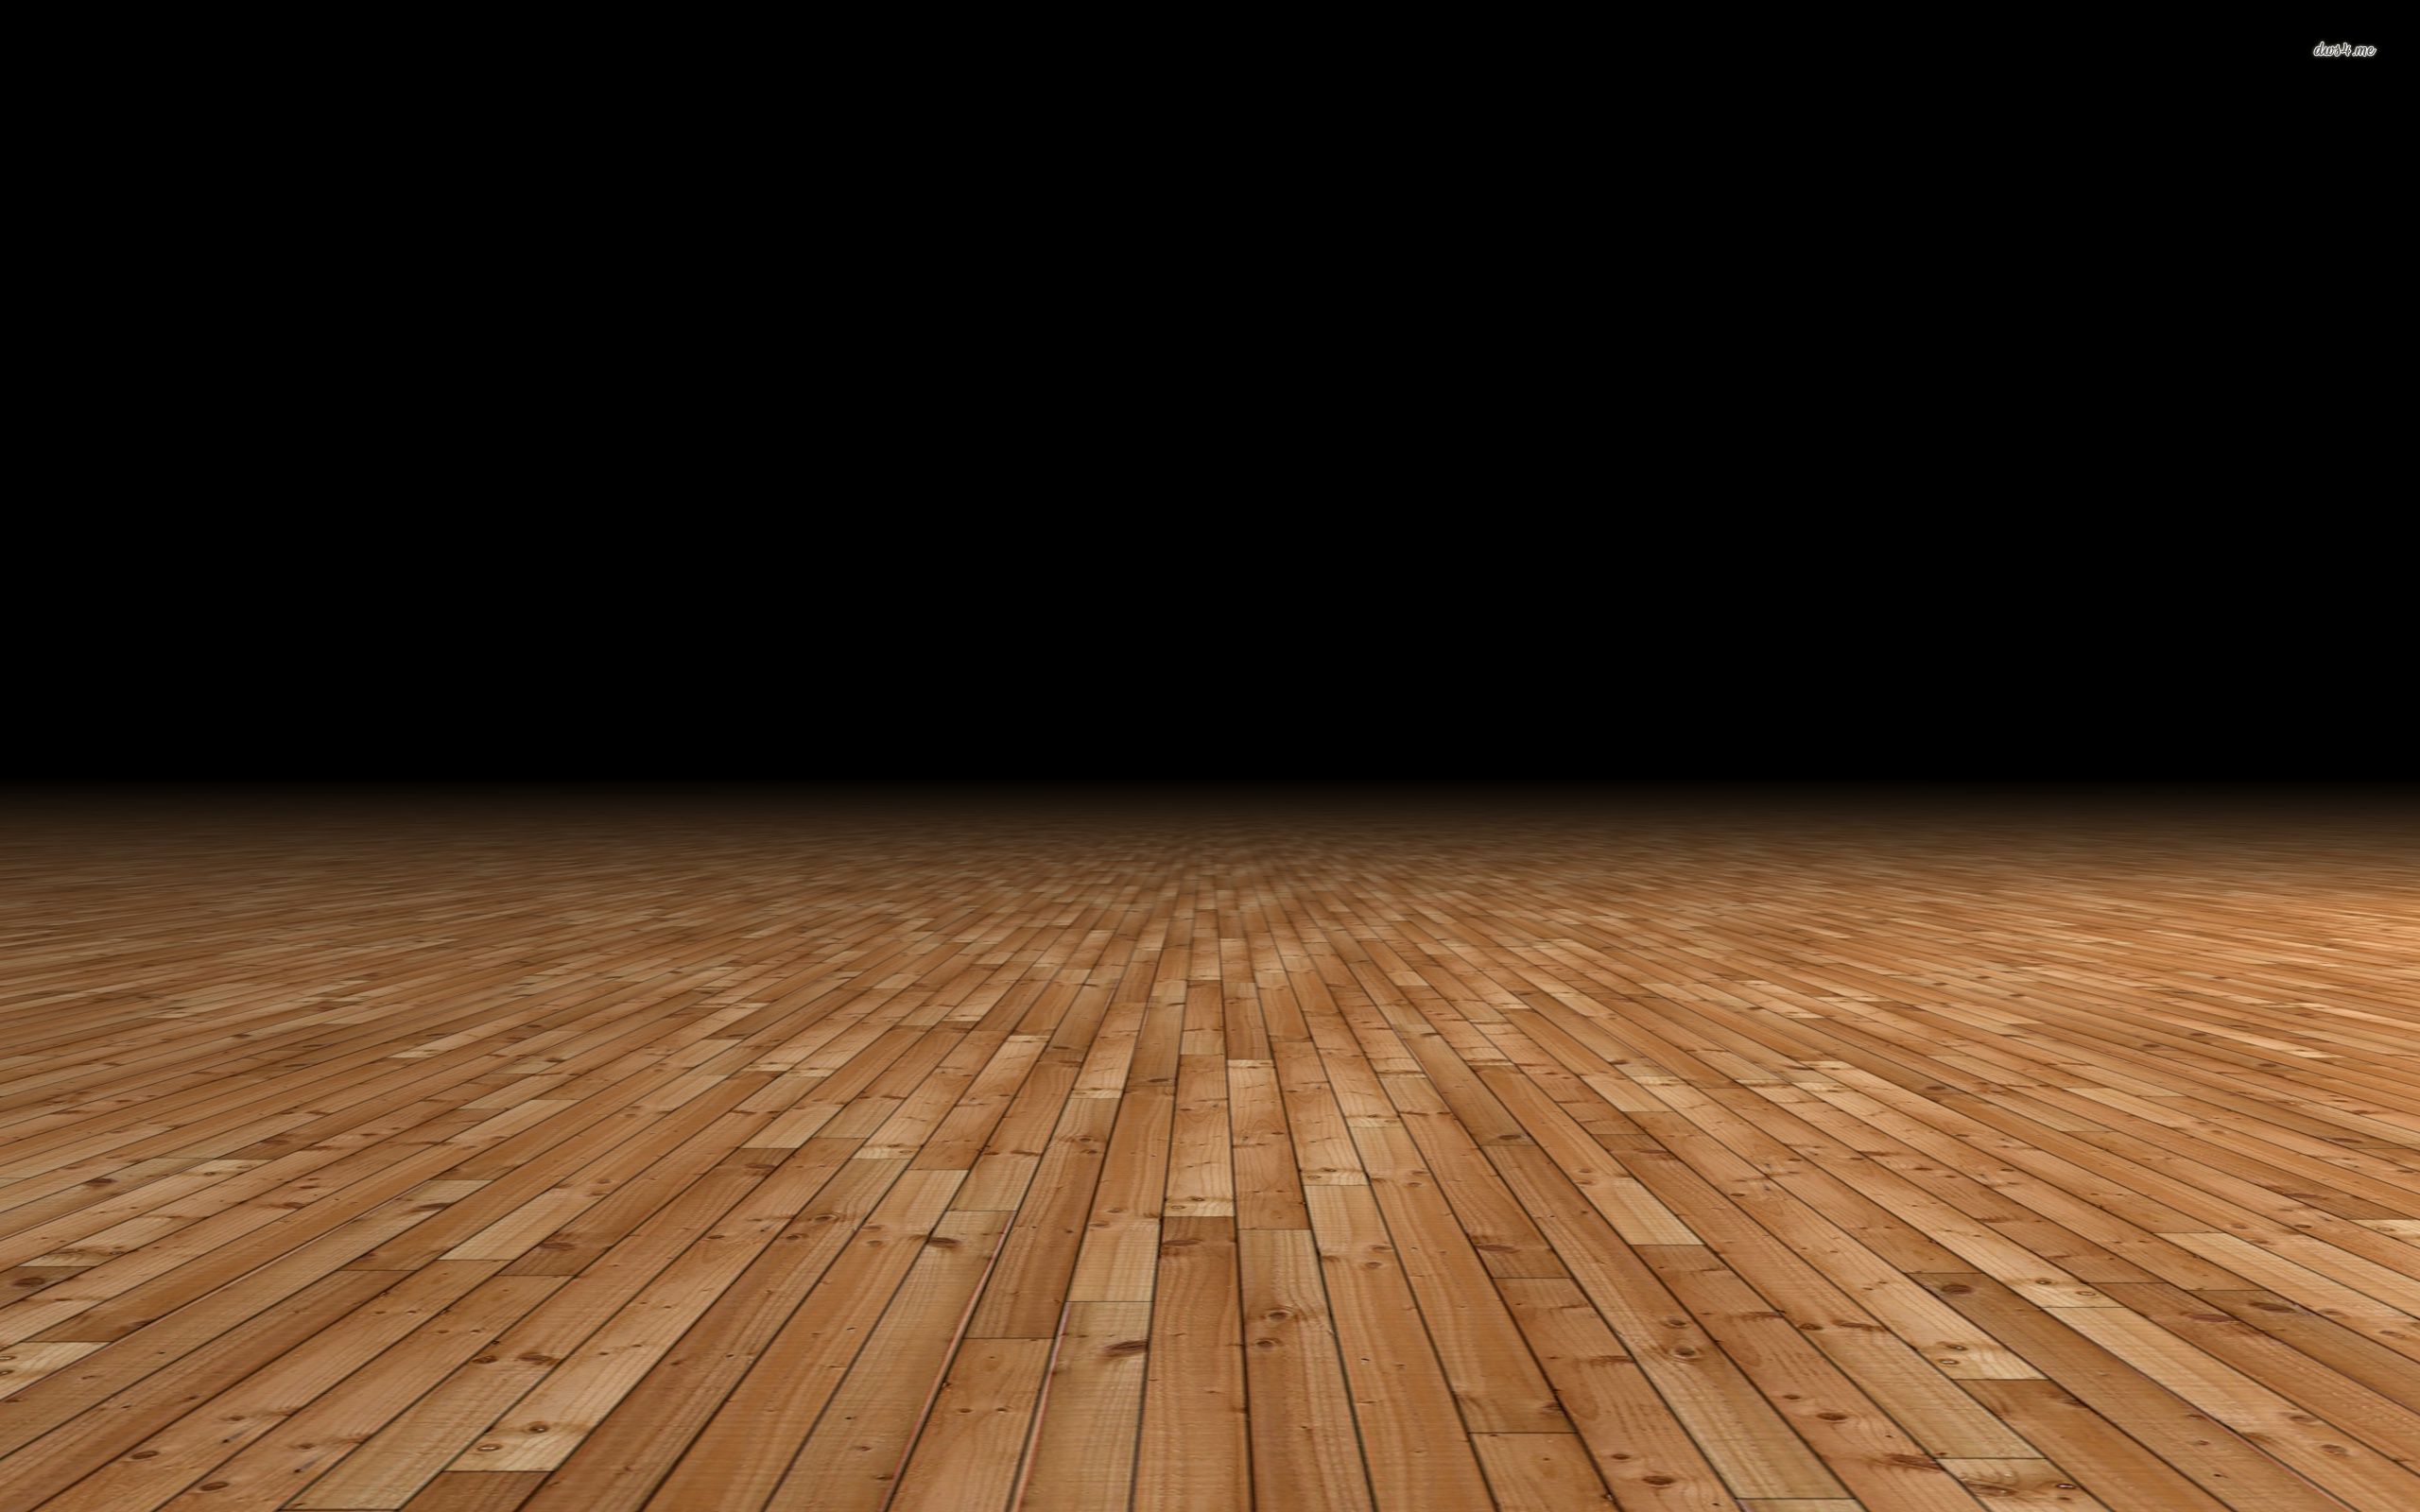 Free Hd, Wood, Floor Background Images, Hd Wooden Floor Background Photo  Background PNG and Vectors | Wooden wallpaper, Wooden flooring, Wood floor  texture